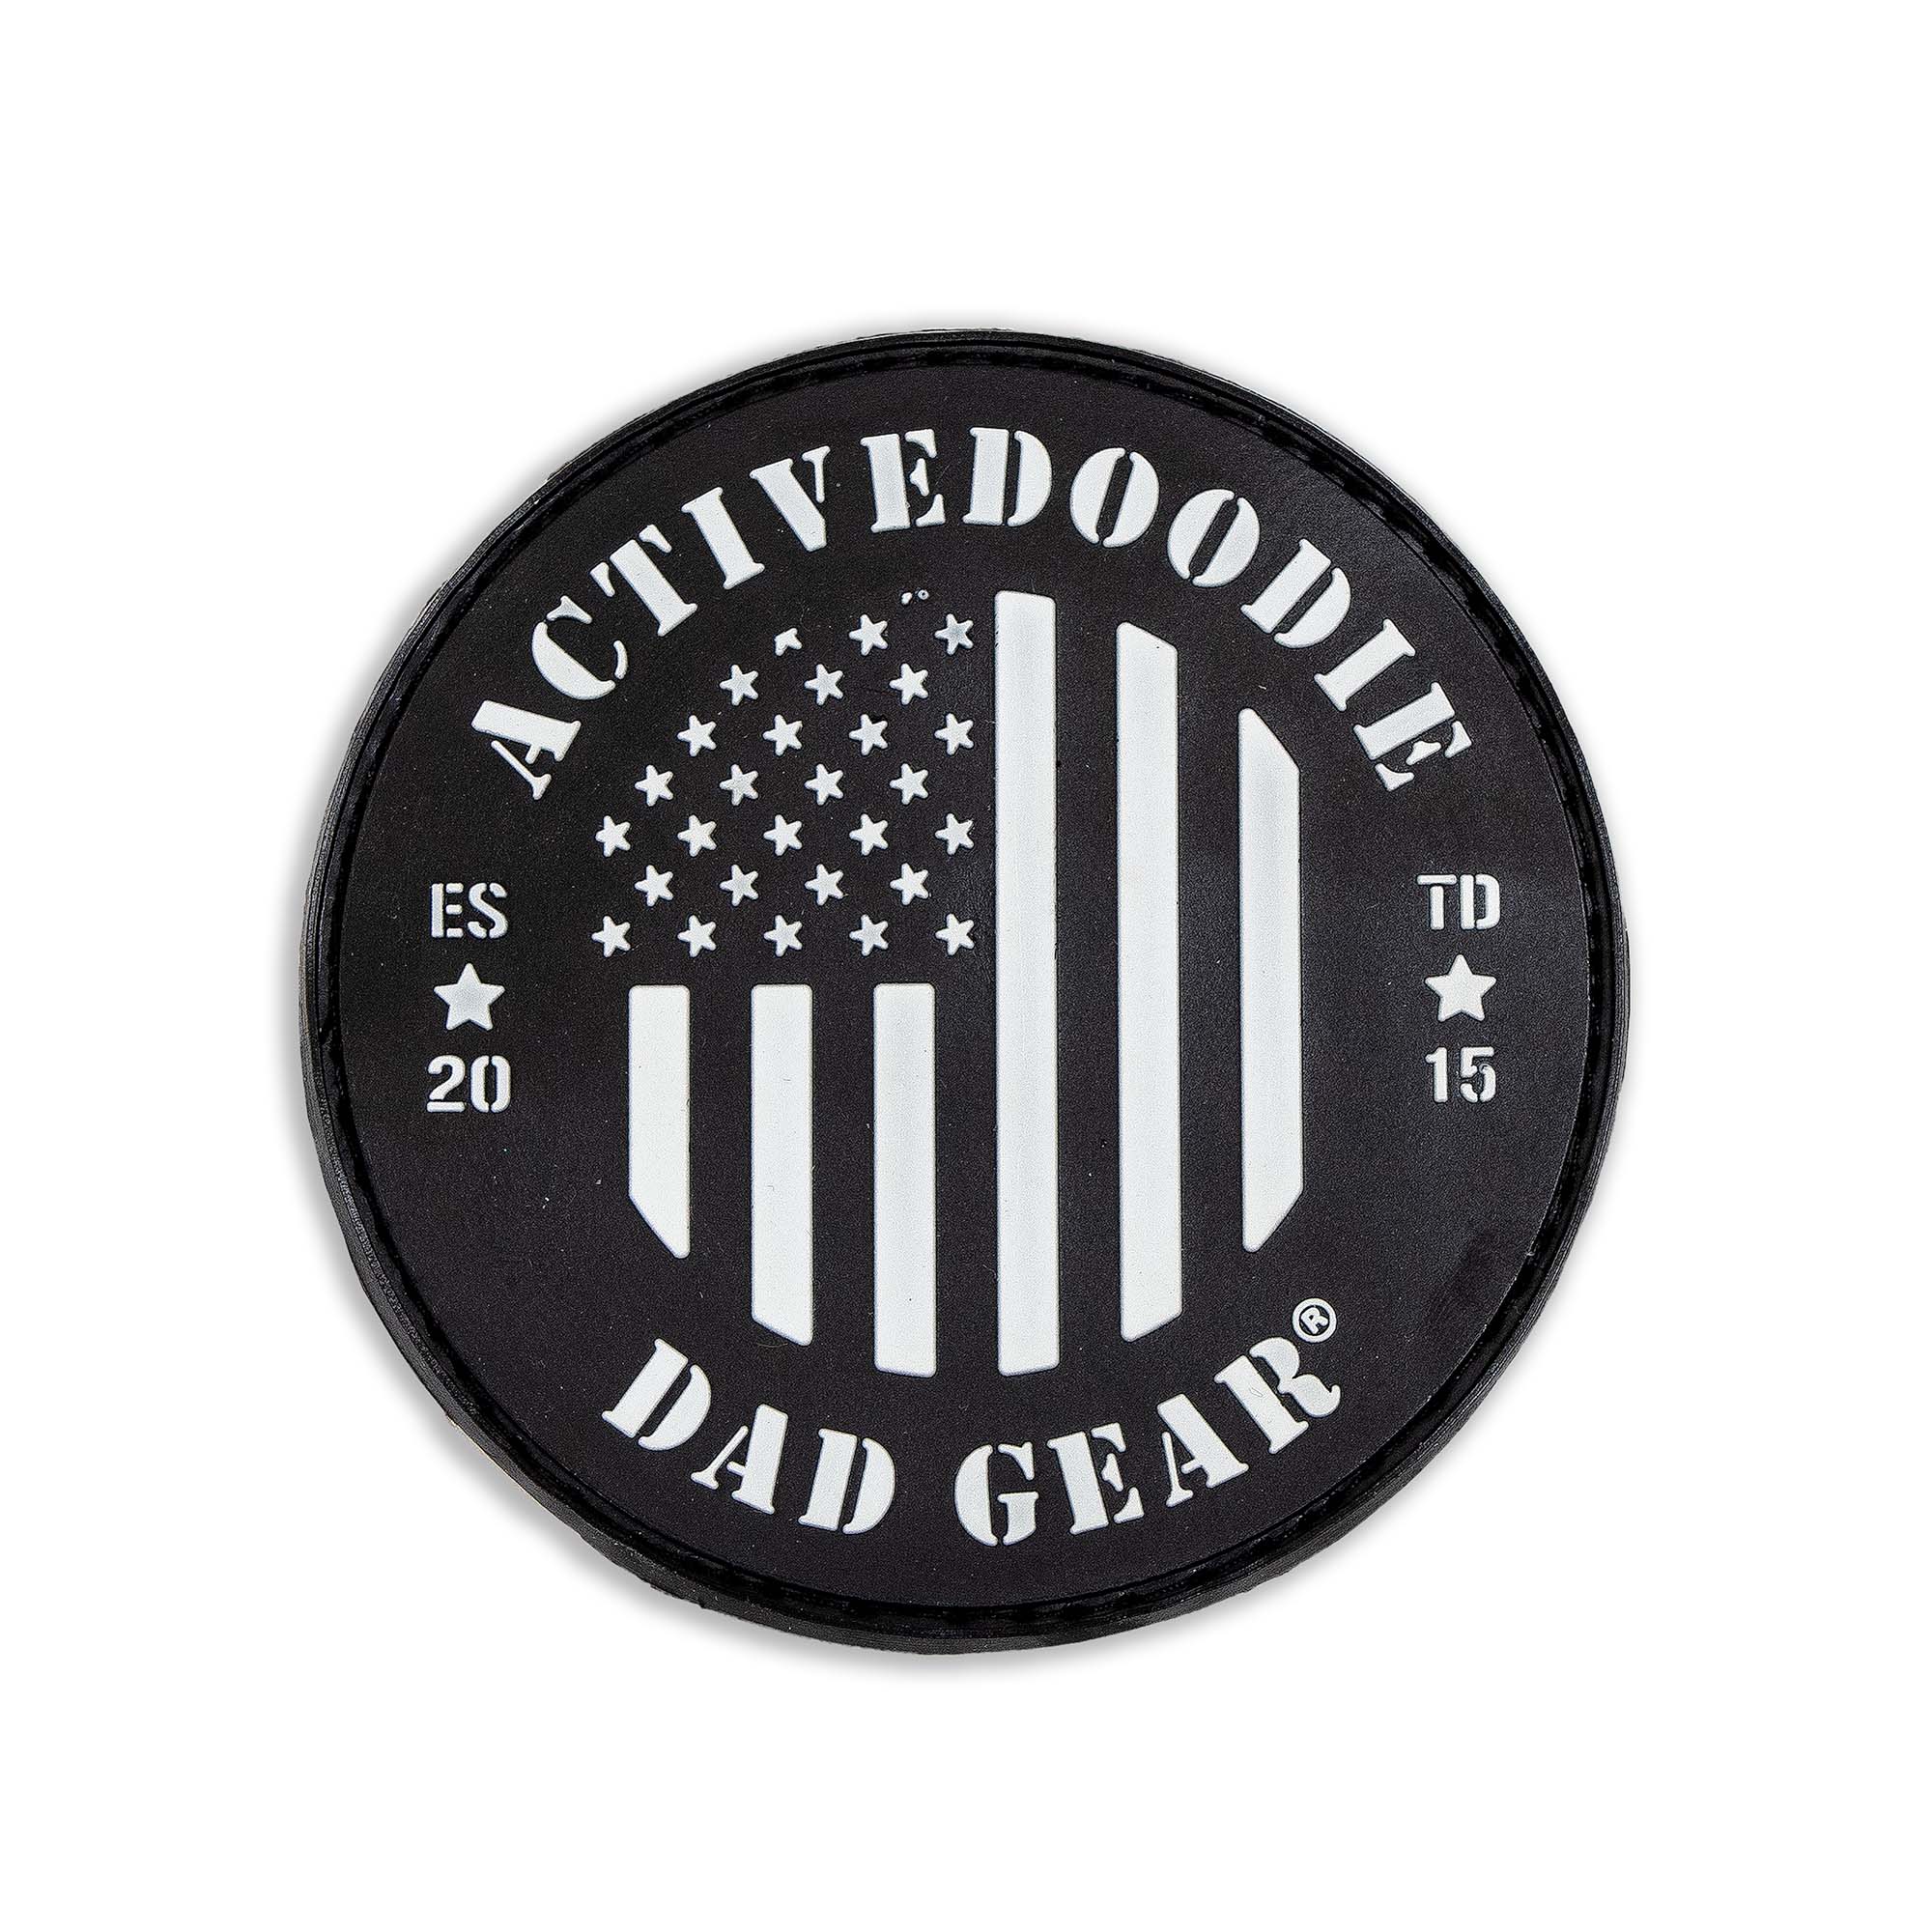 Dad Gear Patch for dads diaper bag